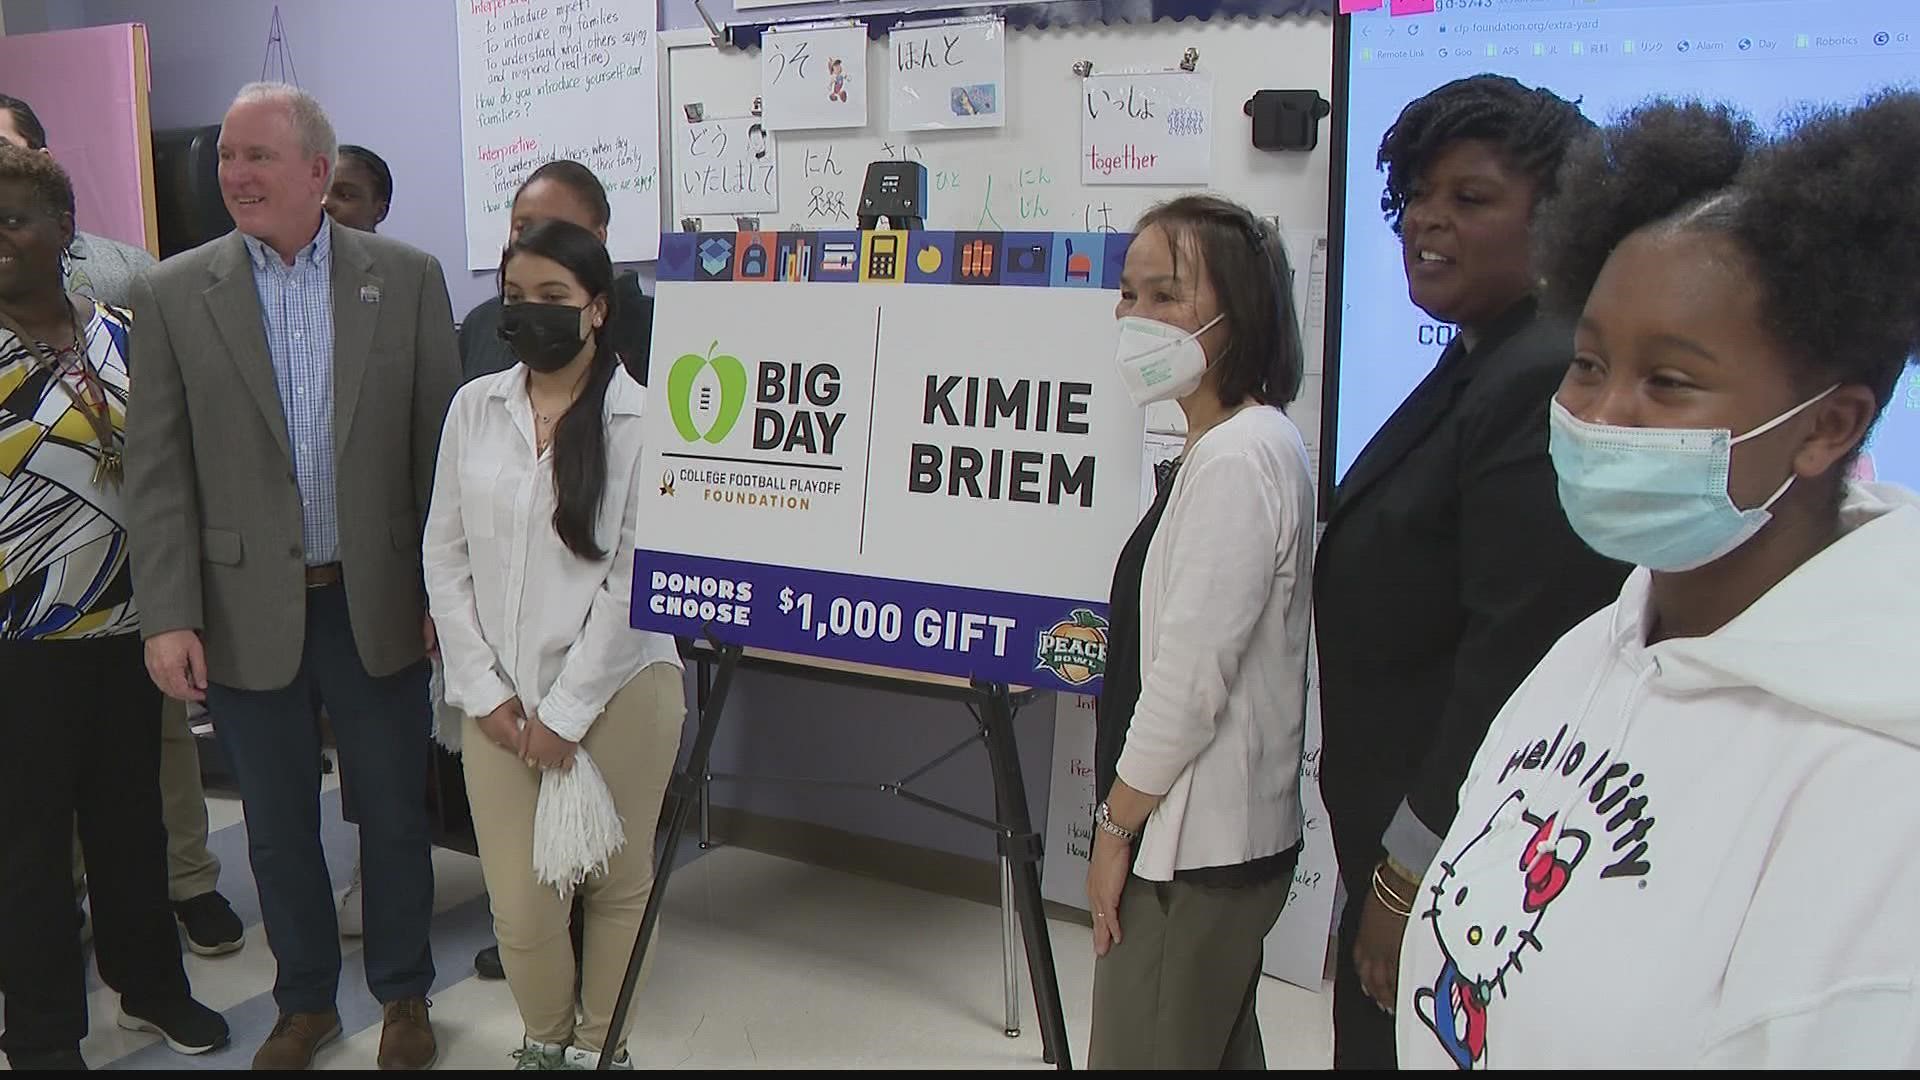 The money will be used to buy the materials needed to help Kimie Briem's students enter their first robotics competition.